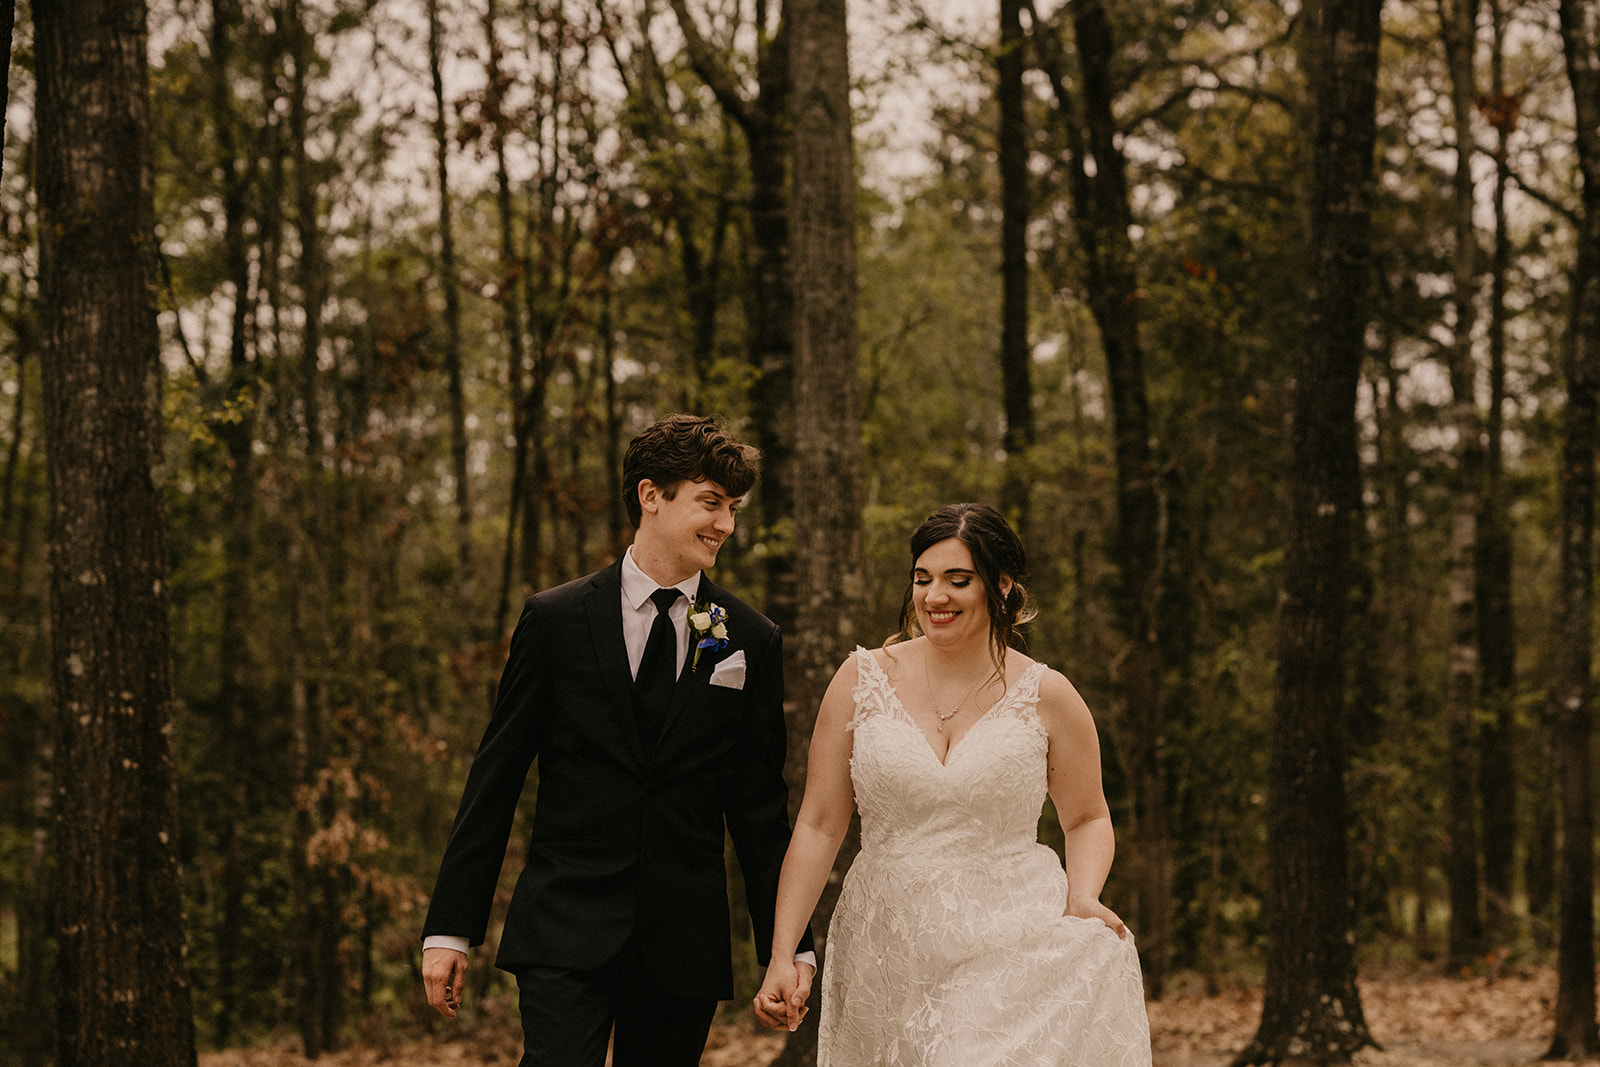 Beautiful outdoor East Texas Wedding at the Venue at Orchard Farms